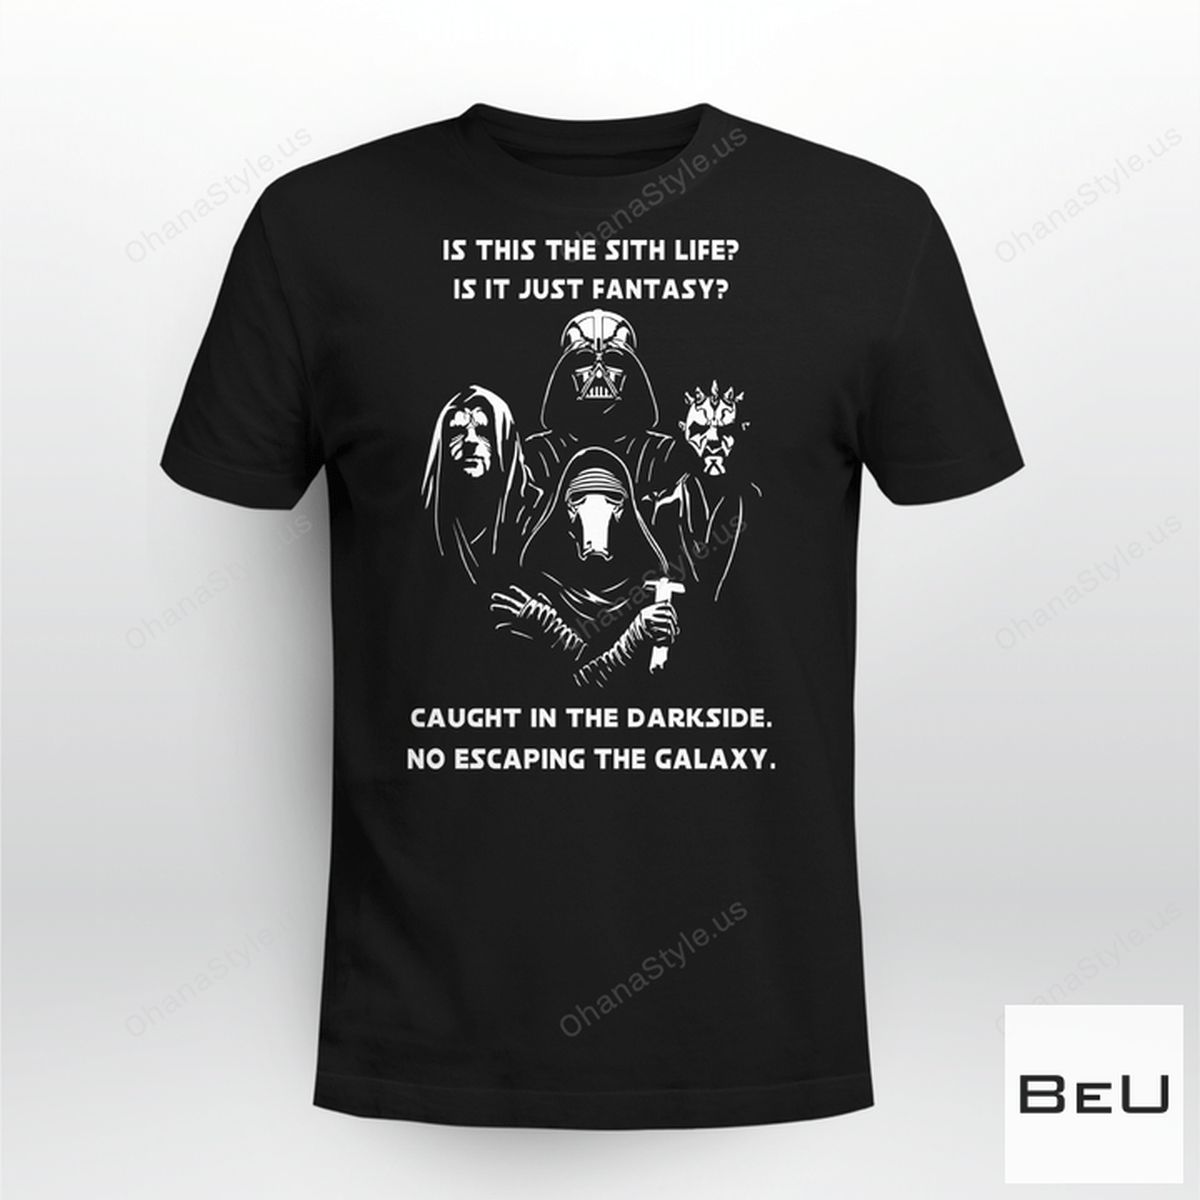 Star Wars Is This The Sith Life Is It Just Fantasy Caught In The Darkside No Escaping The Galaxy Shirt